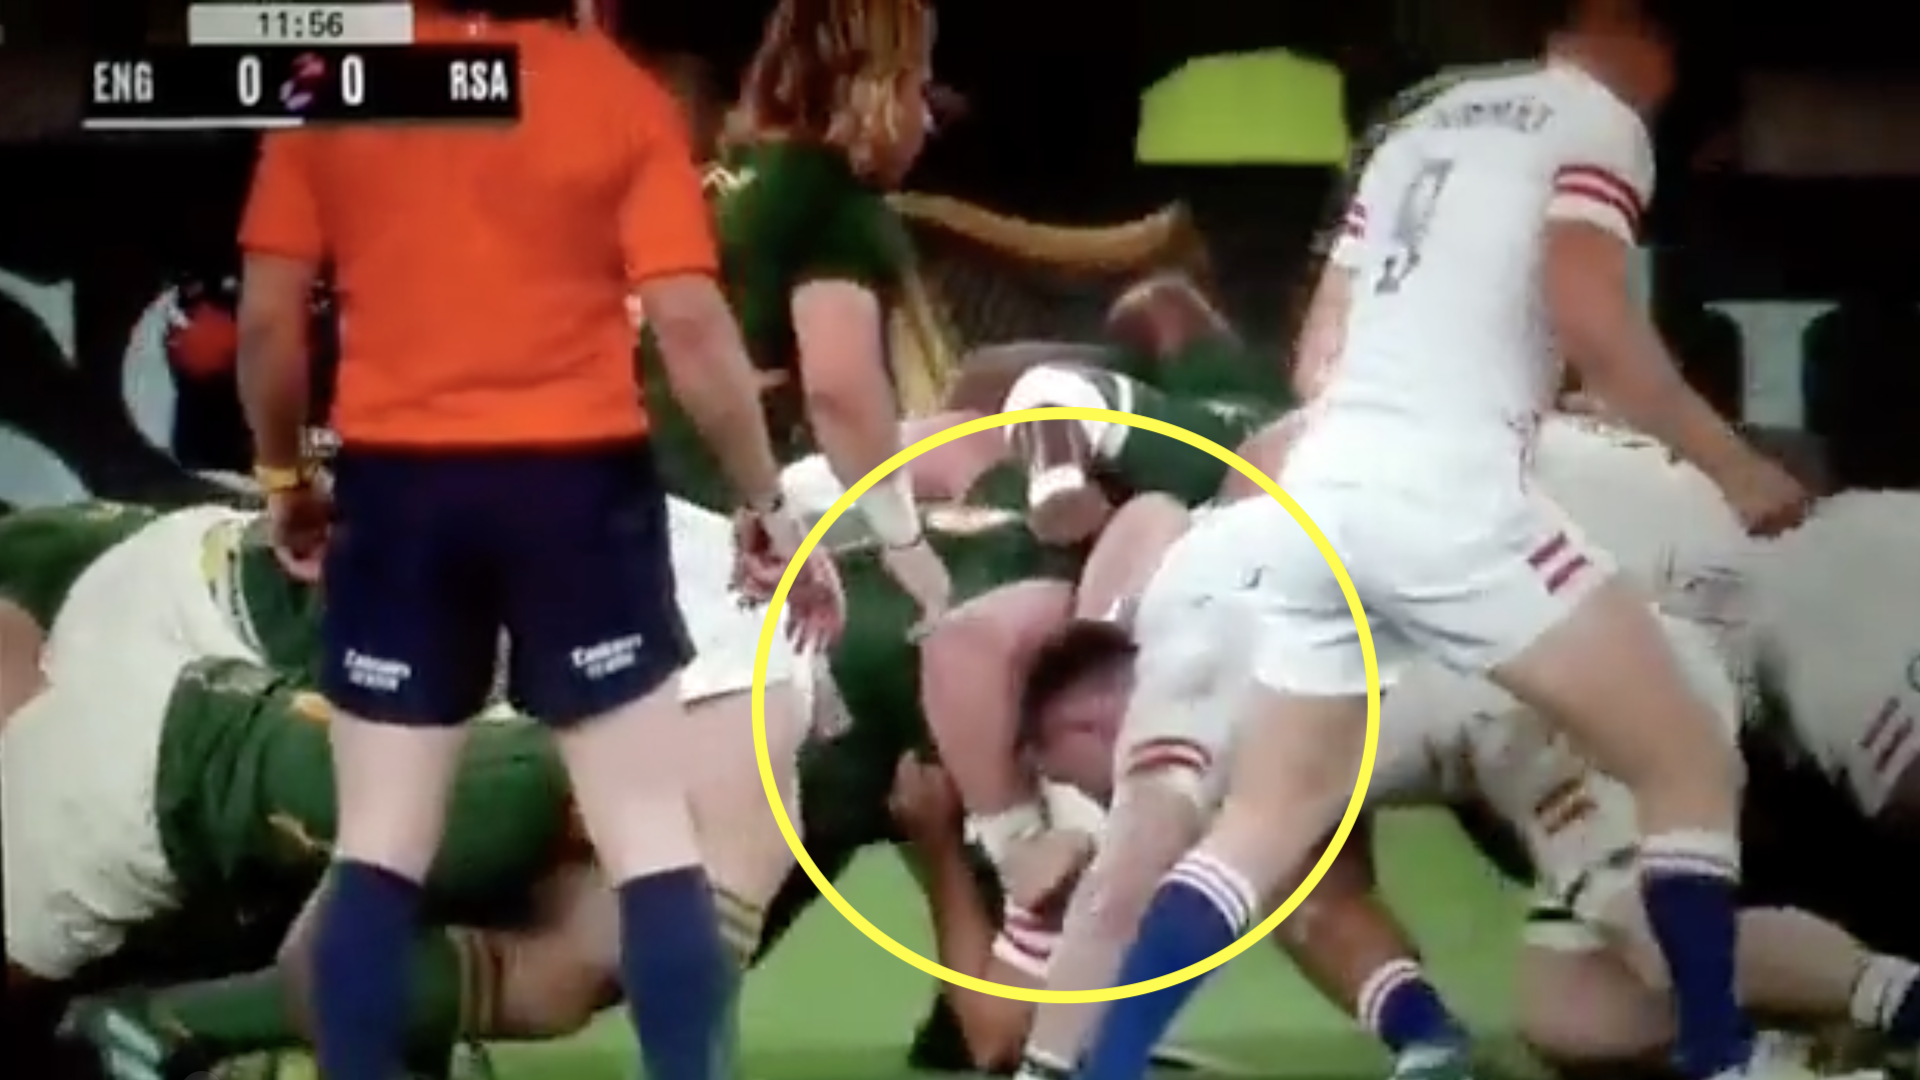 The scrum that might have ended some England careers